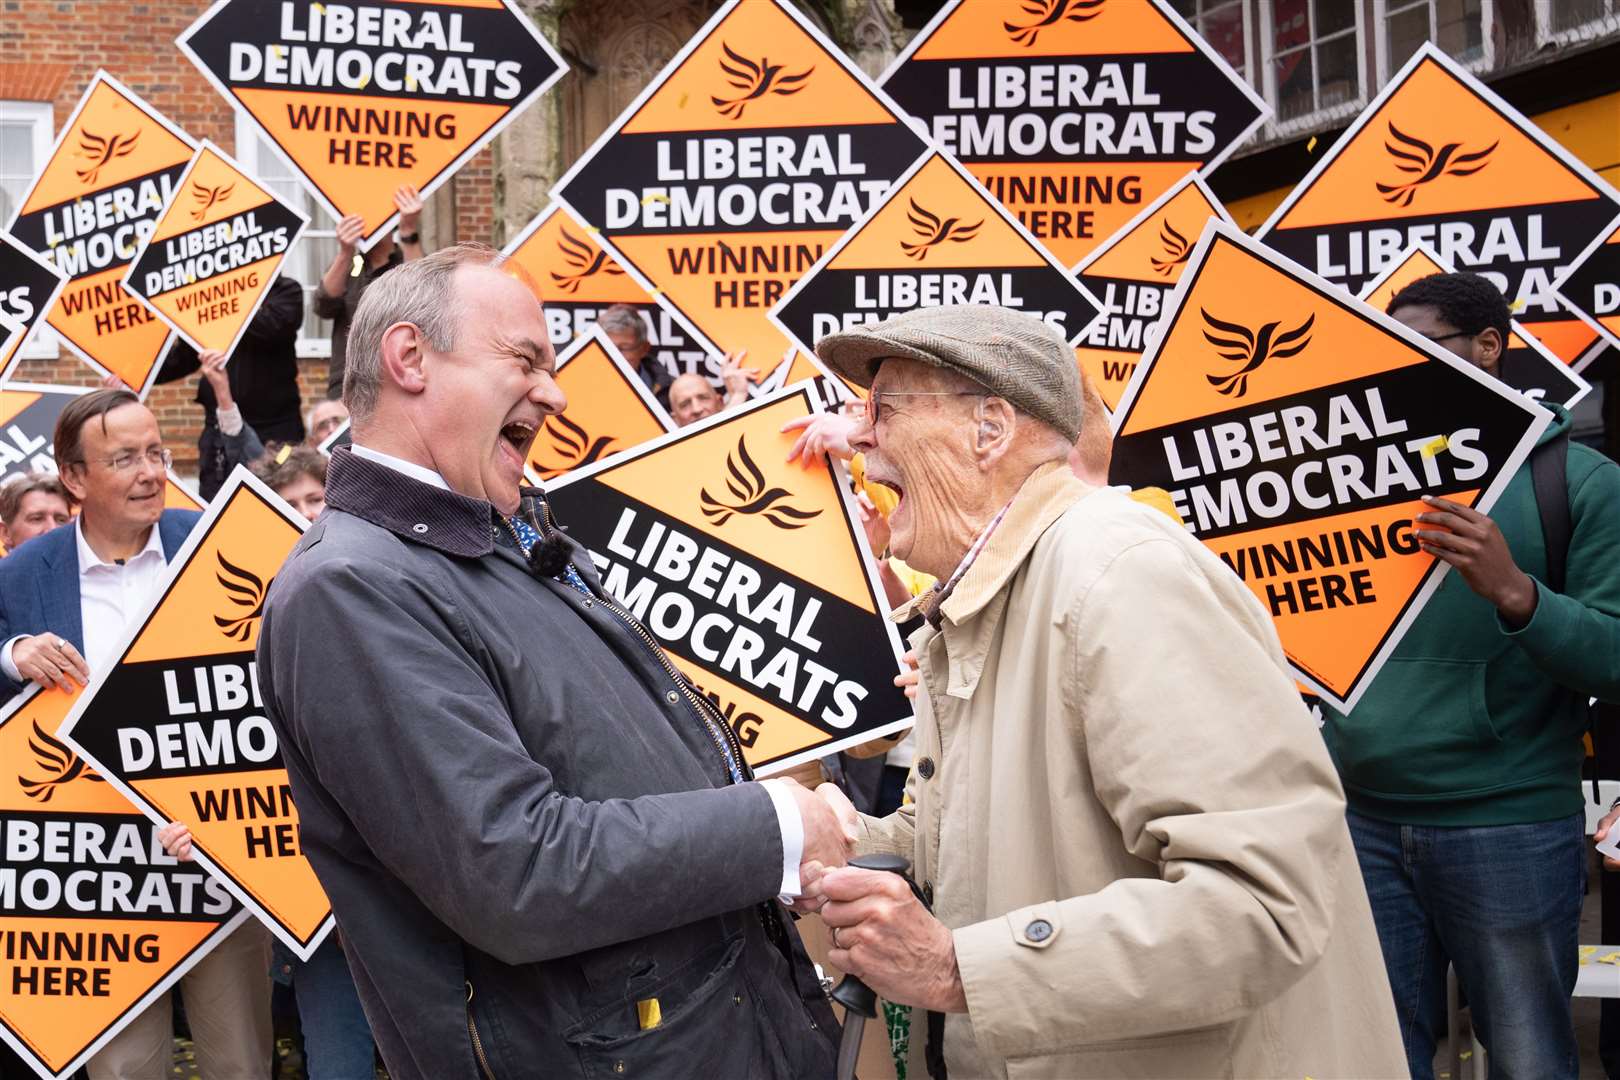 Liberal Democrat leader Sir Ed Davey is greeted by supporters as he arrives to join local Lib Dem campaigners at a celebratory rally in Winchester, following the results in local government elections (Stefan Rousseau/PA)